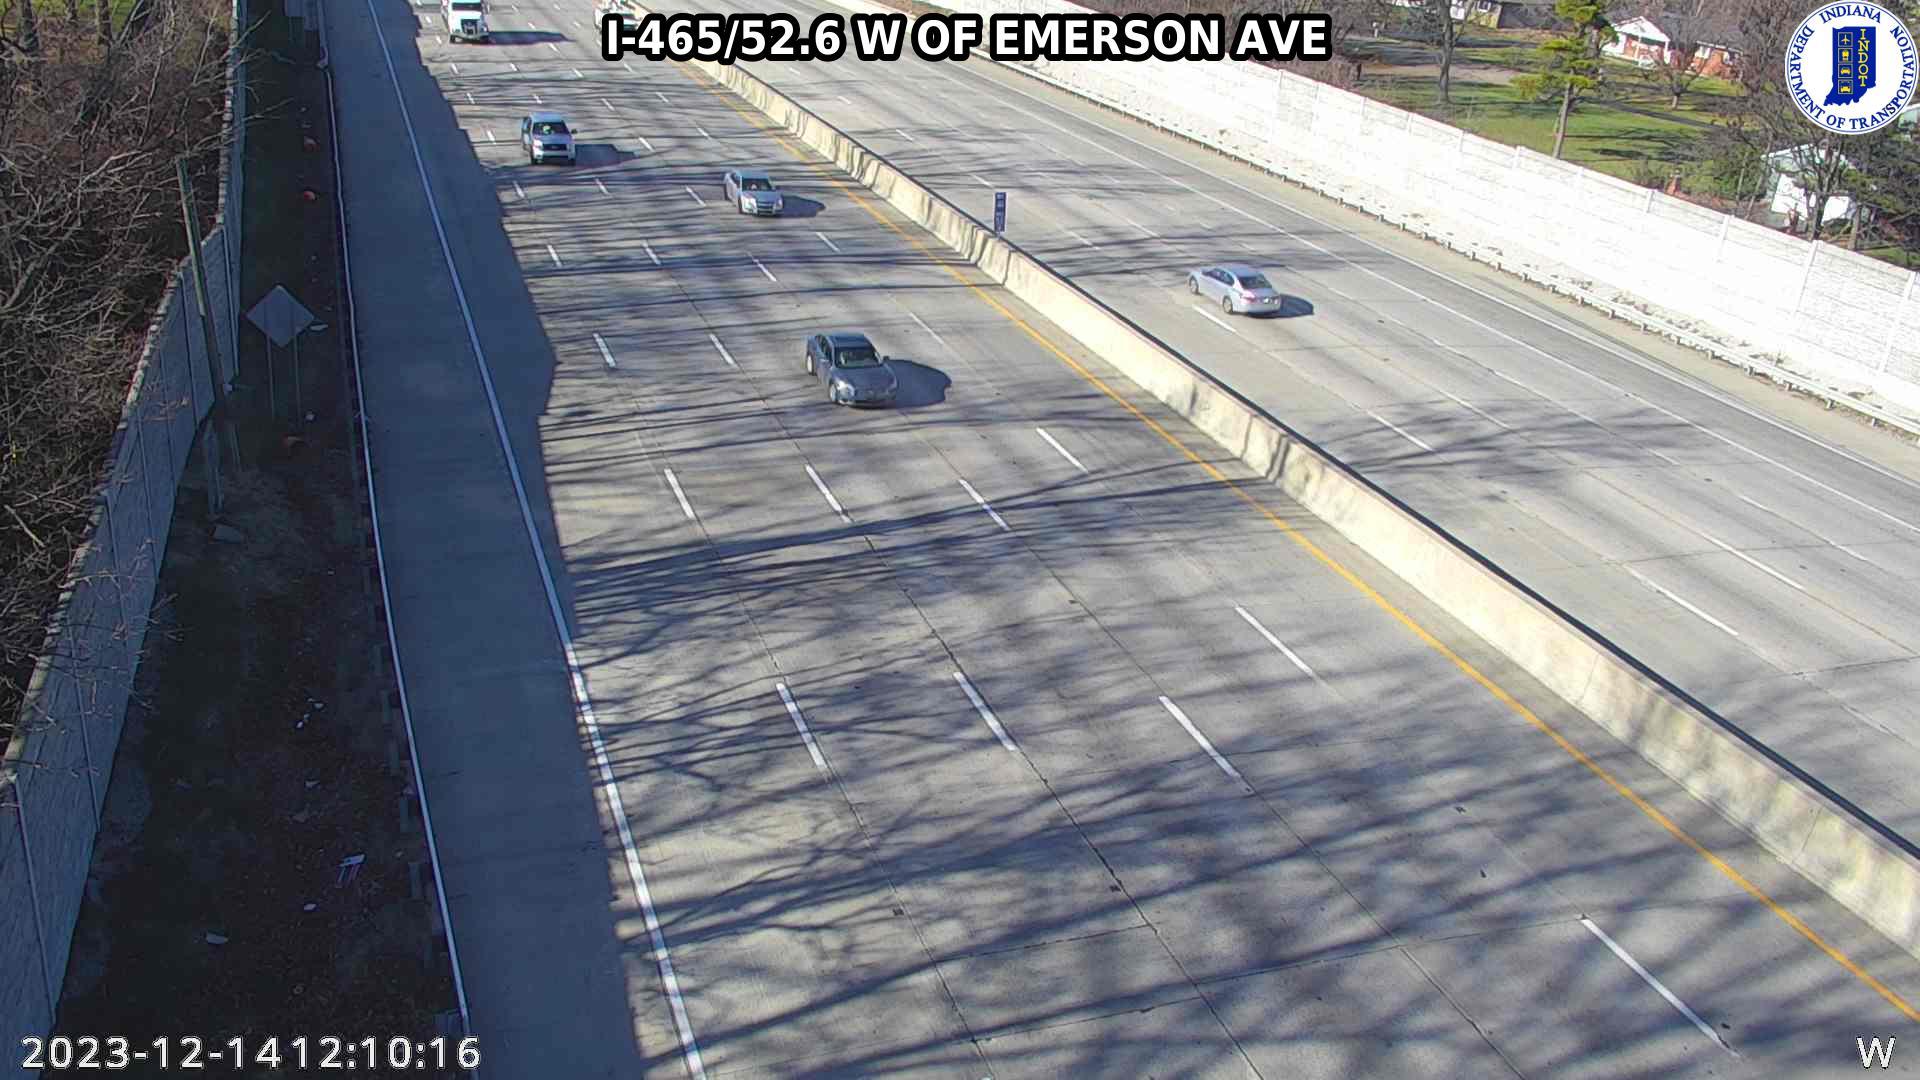 Traffic Cam Beech Grove: I-465: I-465/52.6 W OF EMERSON AVE Player